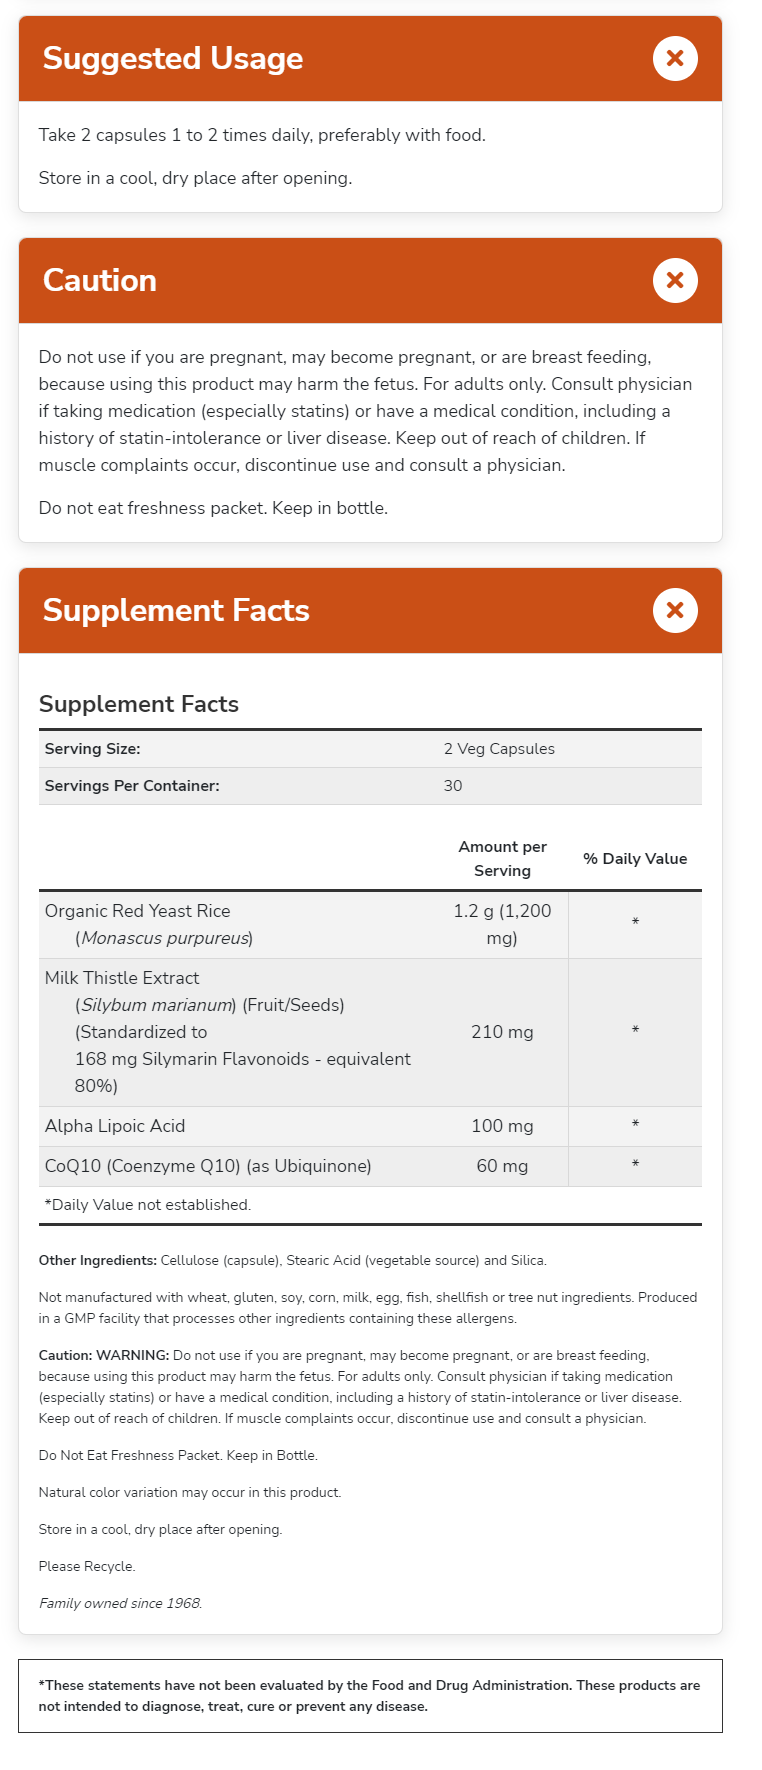 Supplement usage instructions and warnings, supplement facts about Organic Red Yeast Rice, Milk Thistle Extract, and CoQ10 contents, storage, and all-natural ingredients.